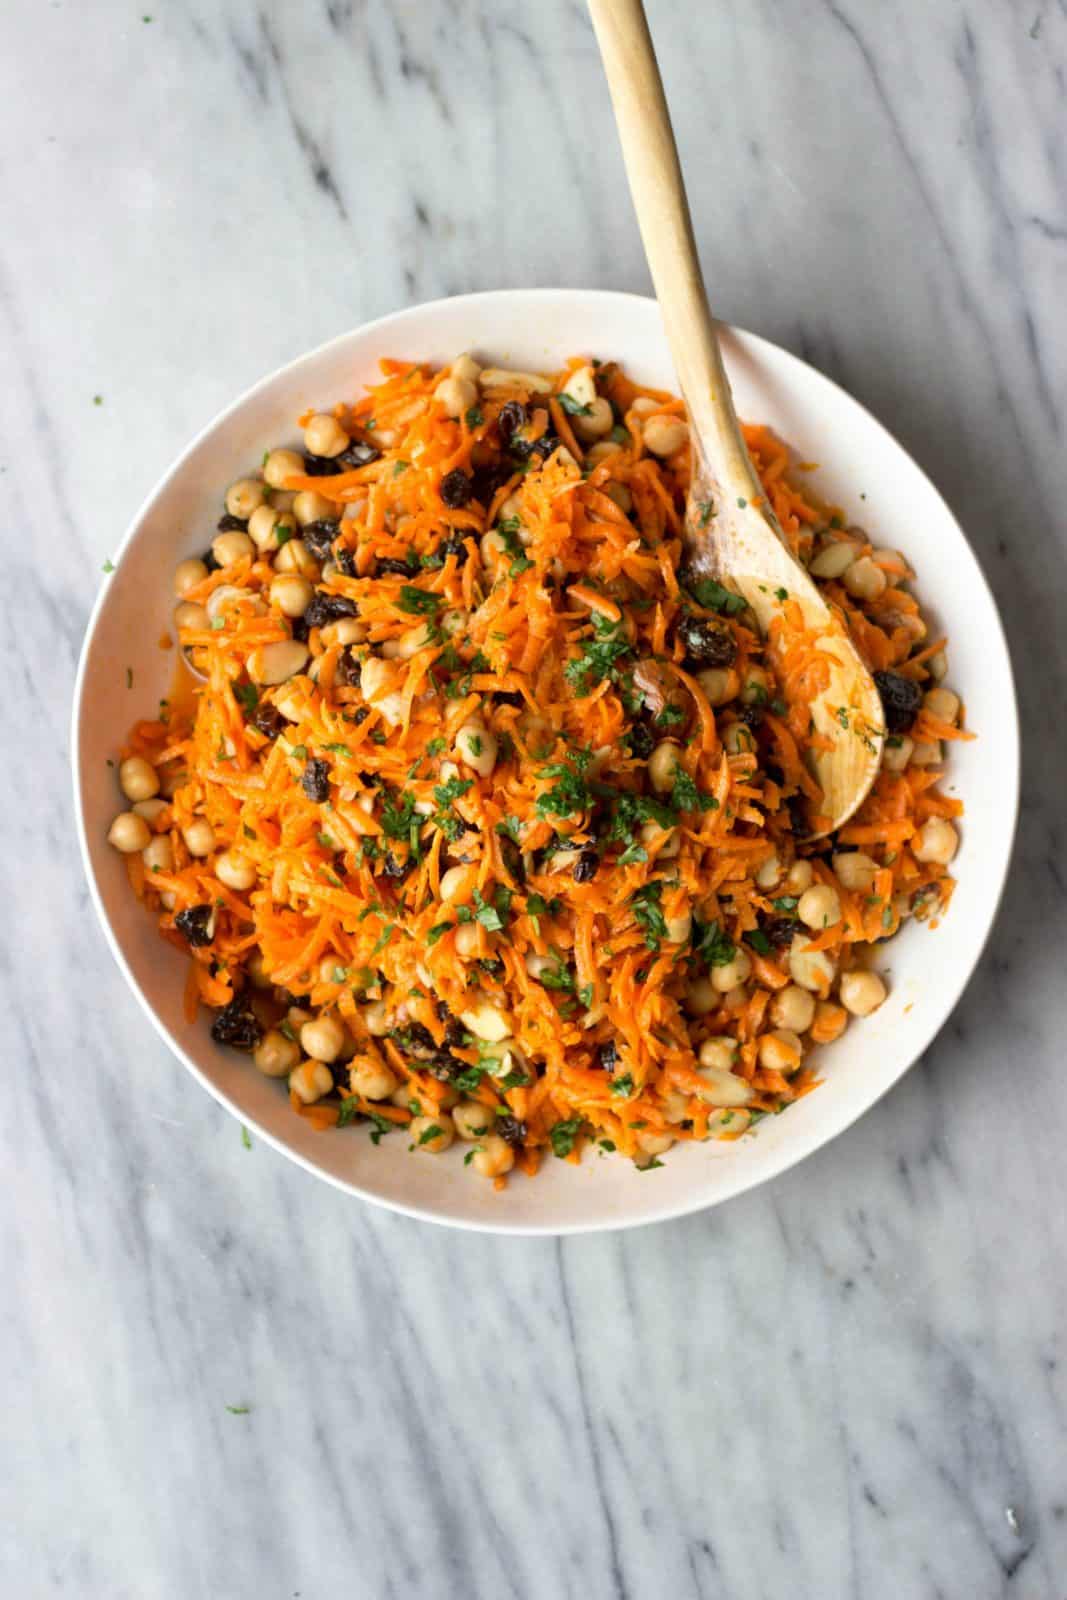 Carrot, Chickpea & Raisin Salad in a white bowl